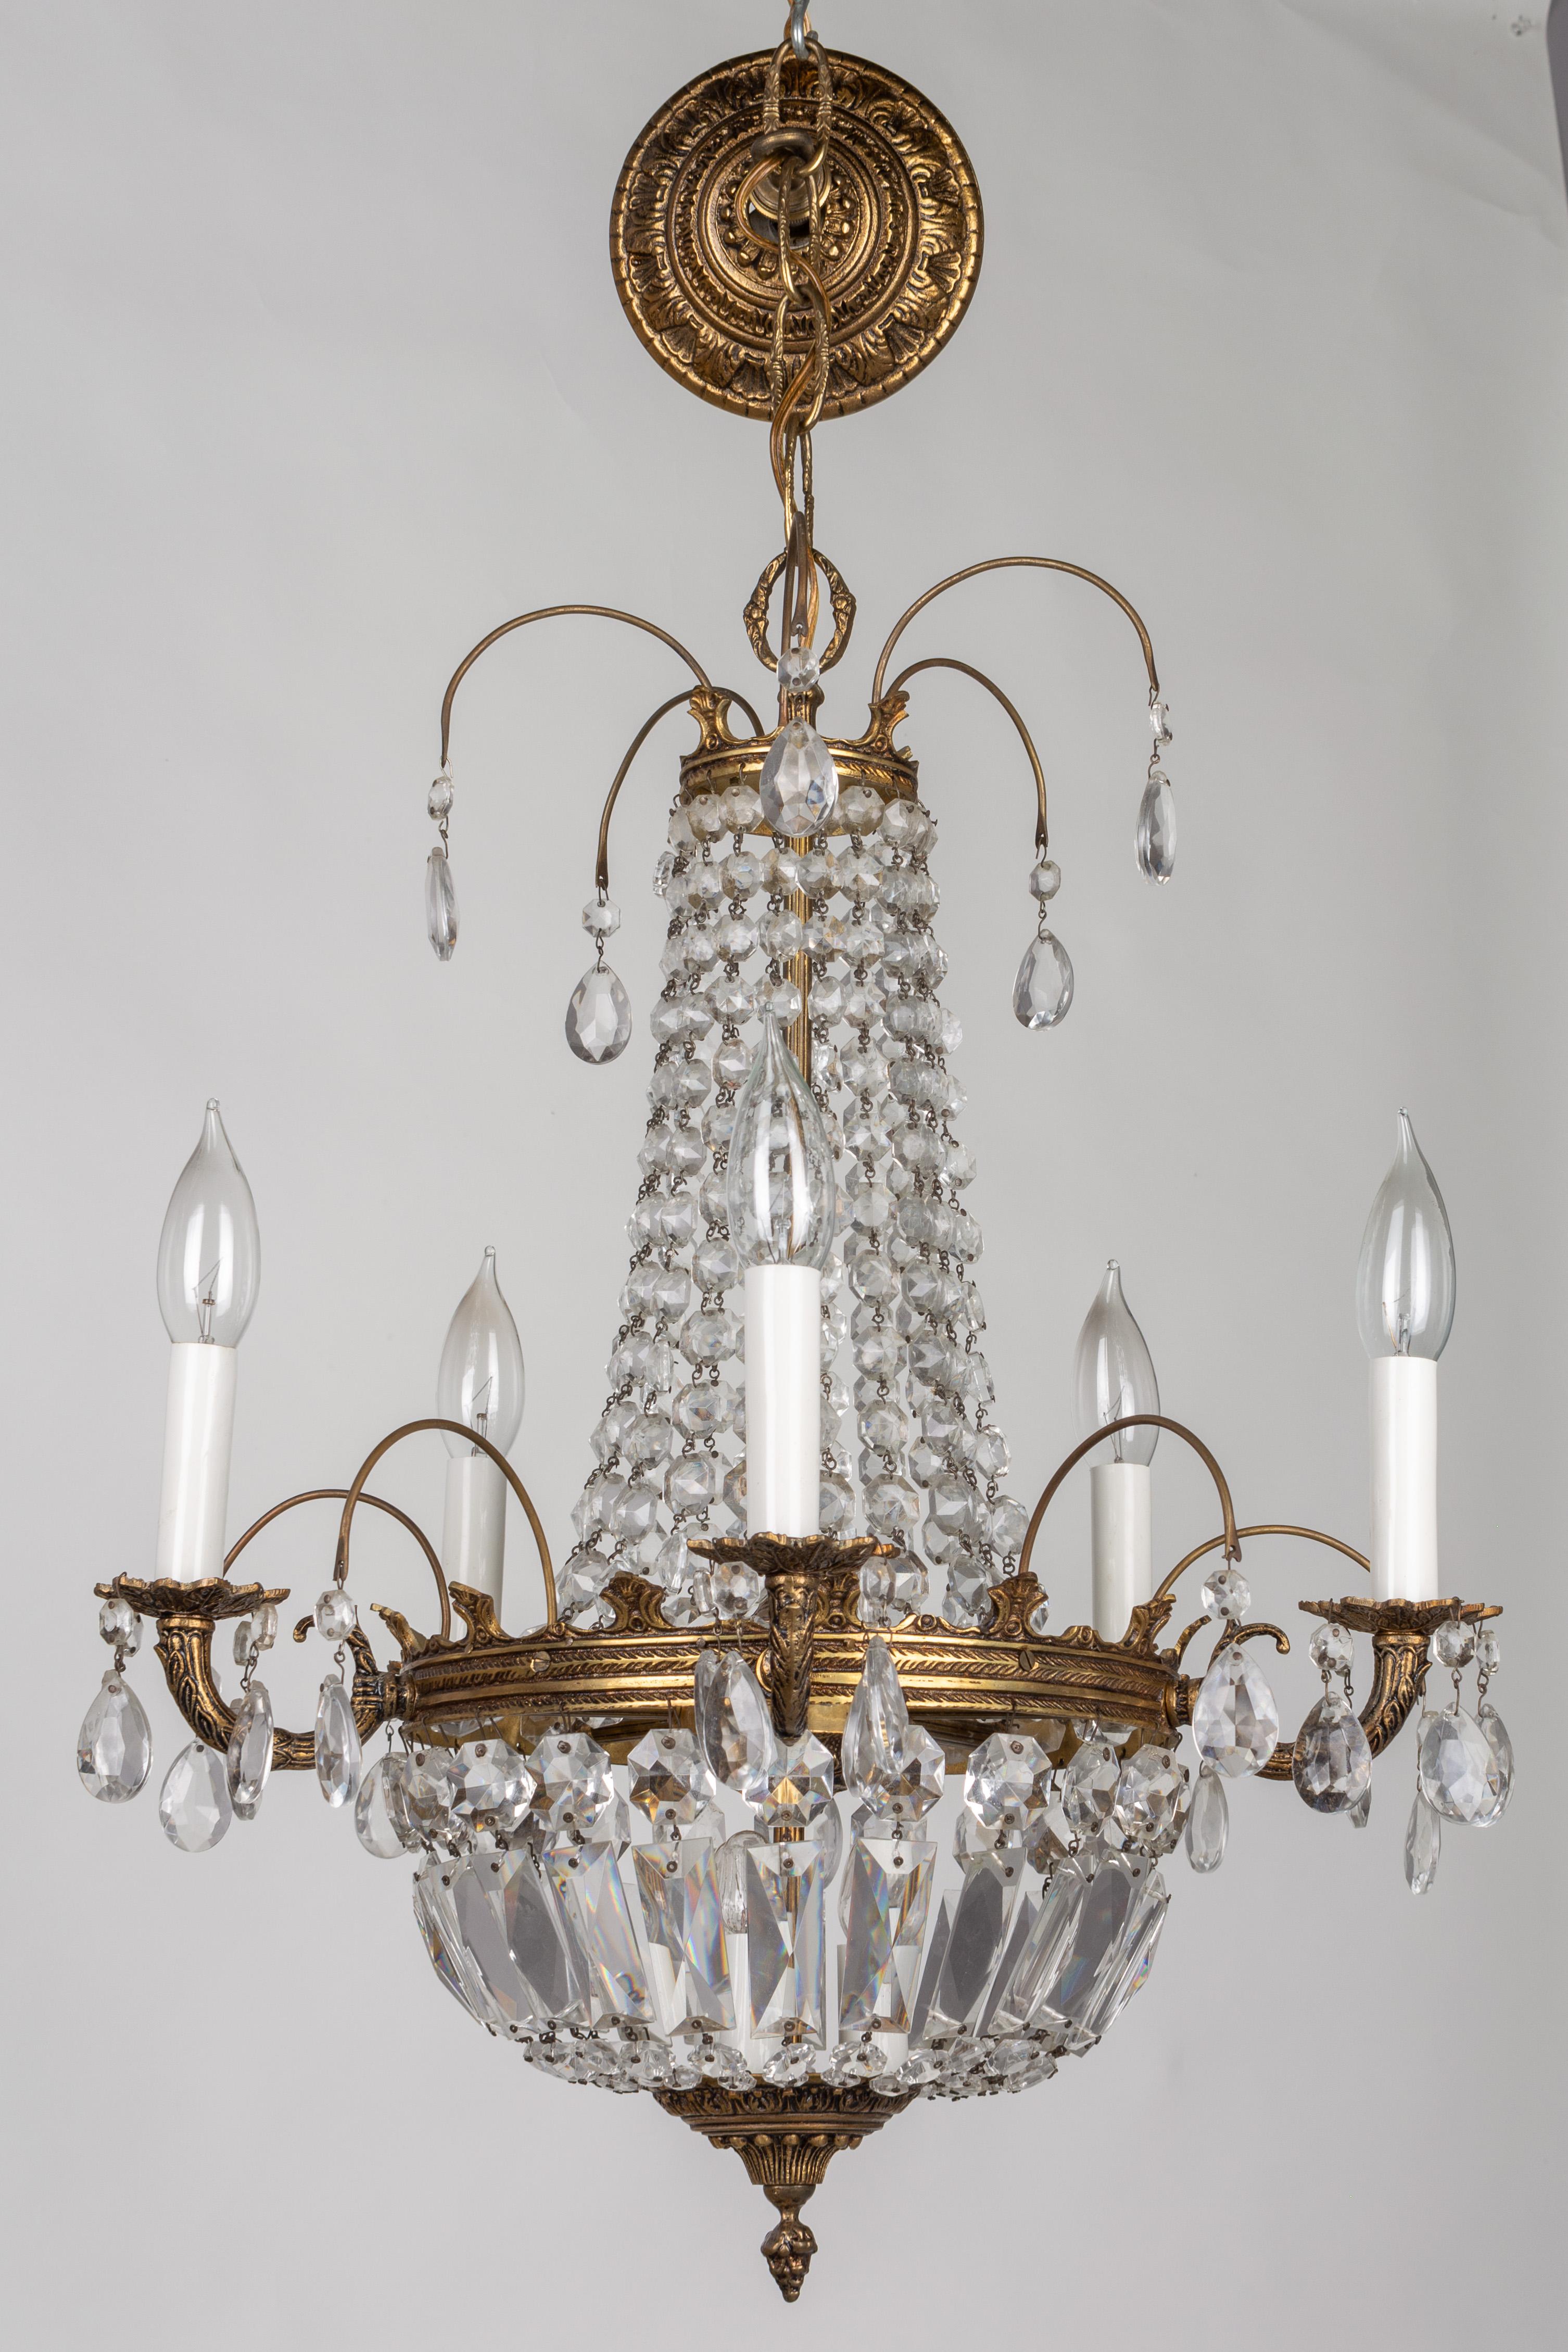 A French Empire style crystal chandelier with six brass candle branches and three interior lights. Graduated crystal prisms drape down to central embossed brass ring. Strands of octagonal crystal jewels and baguettes form the basket below. Original